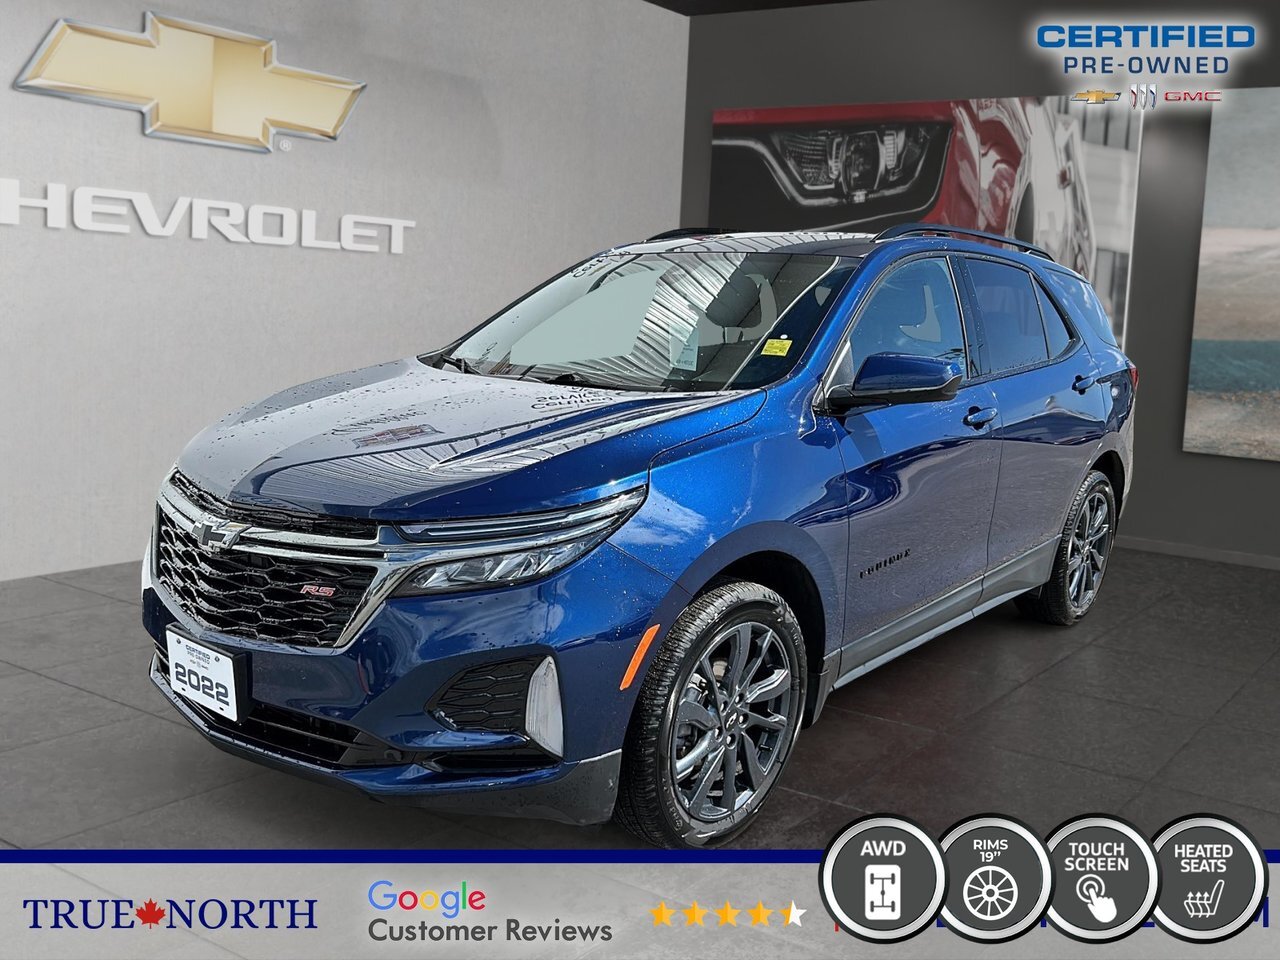 2022 Chevrolet Equinox RS Like new Equinox Certified Pre owned